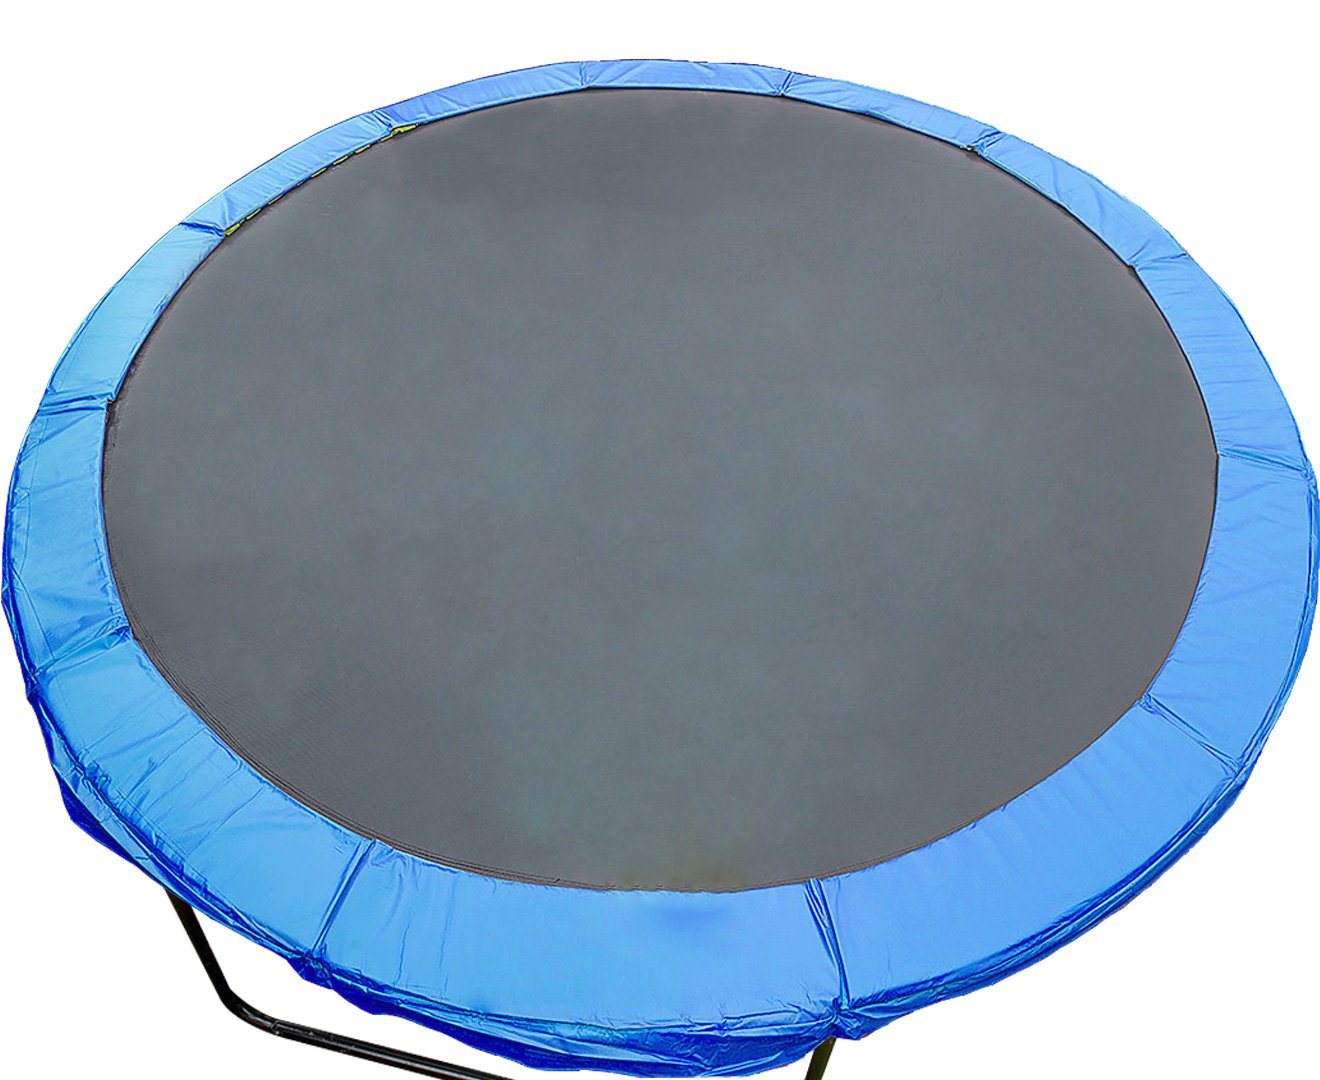 Kahuna 16ft Trampoline Reversible Replacement Pad Round - Orange/Blue - SILBERSHELL